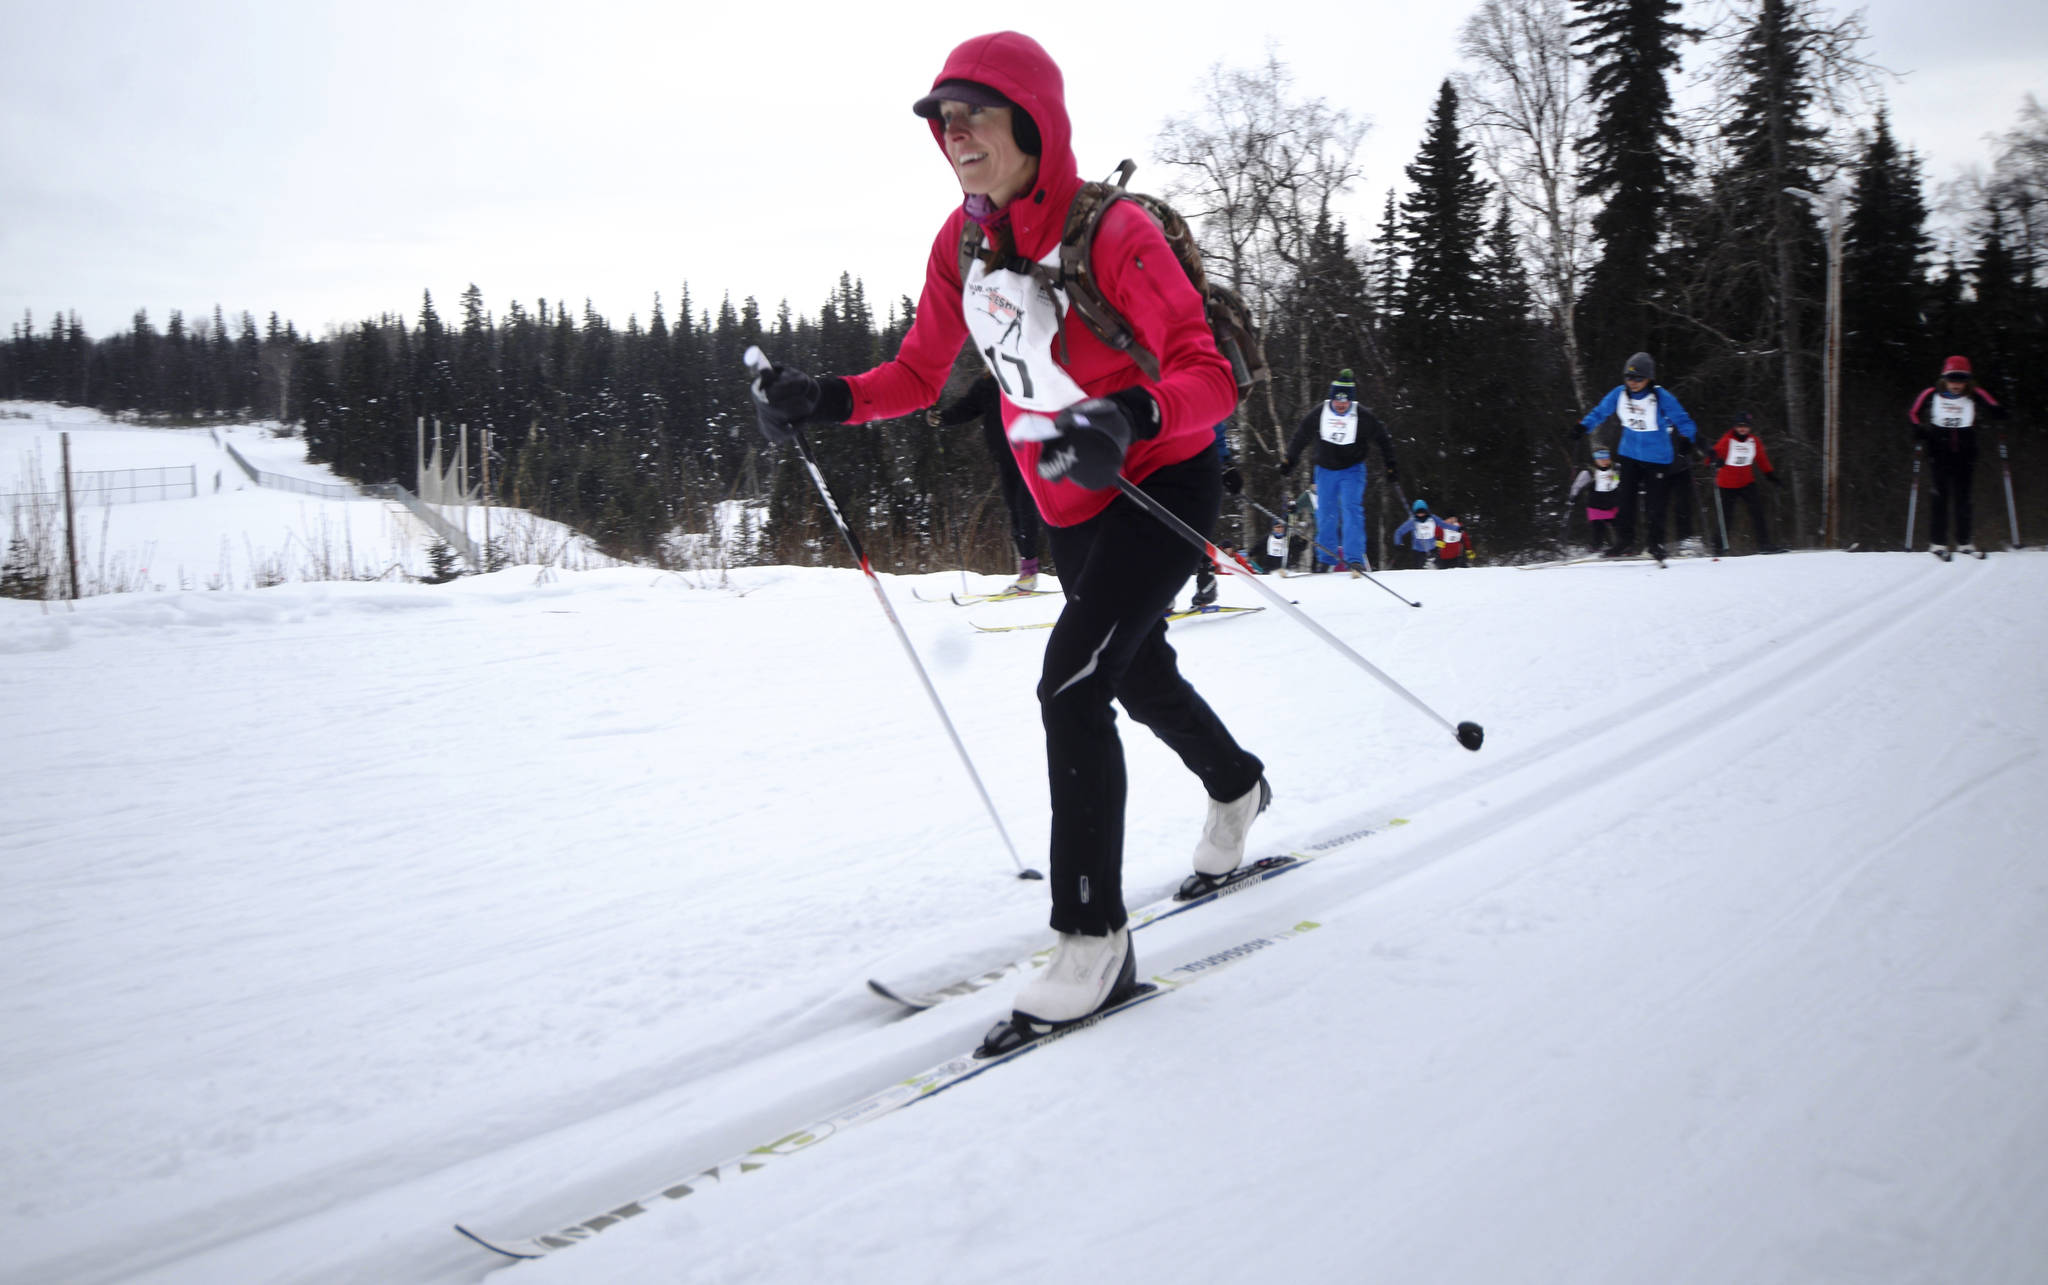 Classic skier Laura Griffin reaches the top of the first hill in the 20-kilometer Tour of Tsalteshi ski race on Sunday, Feb. 18, 2018 near Soldotna, Alaska.